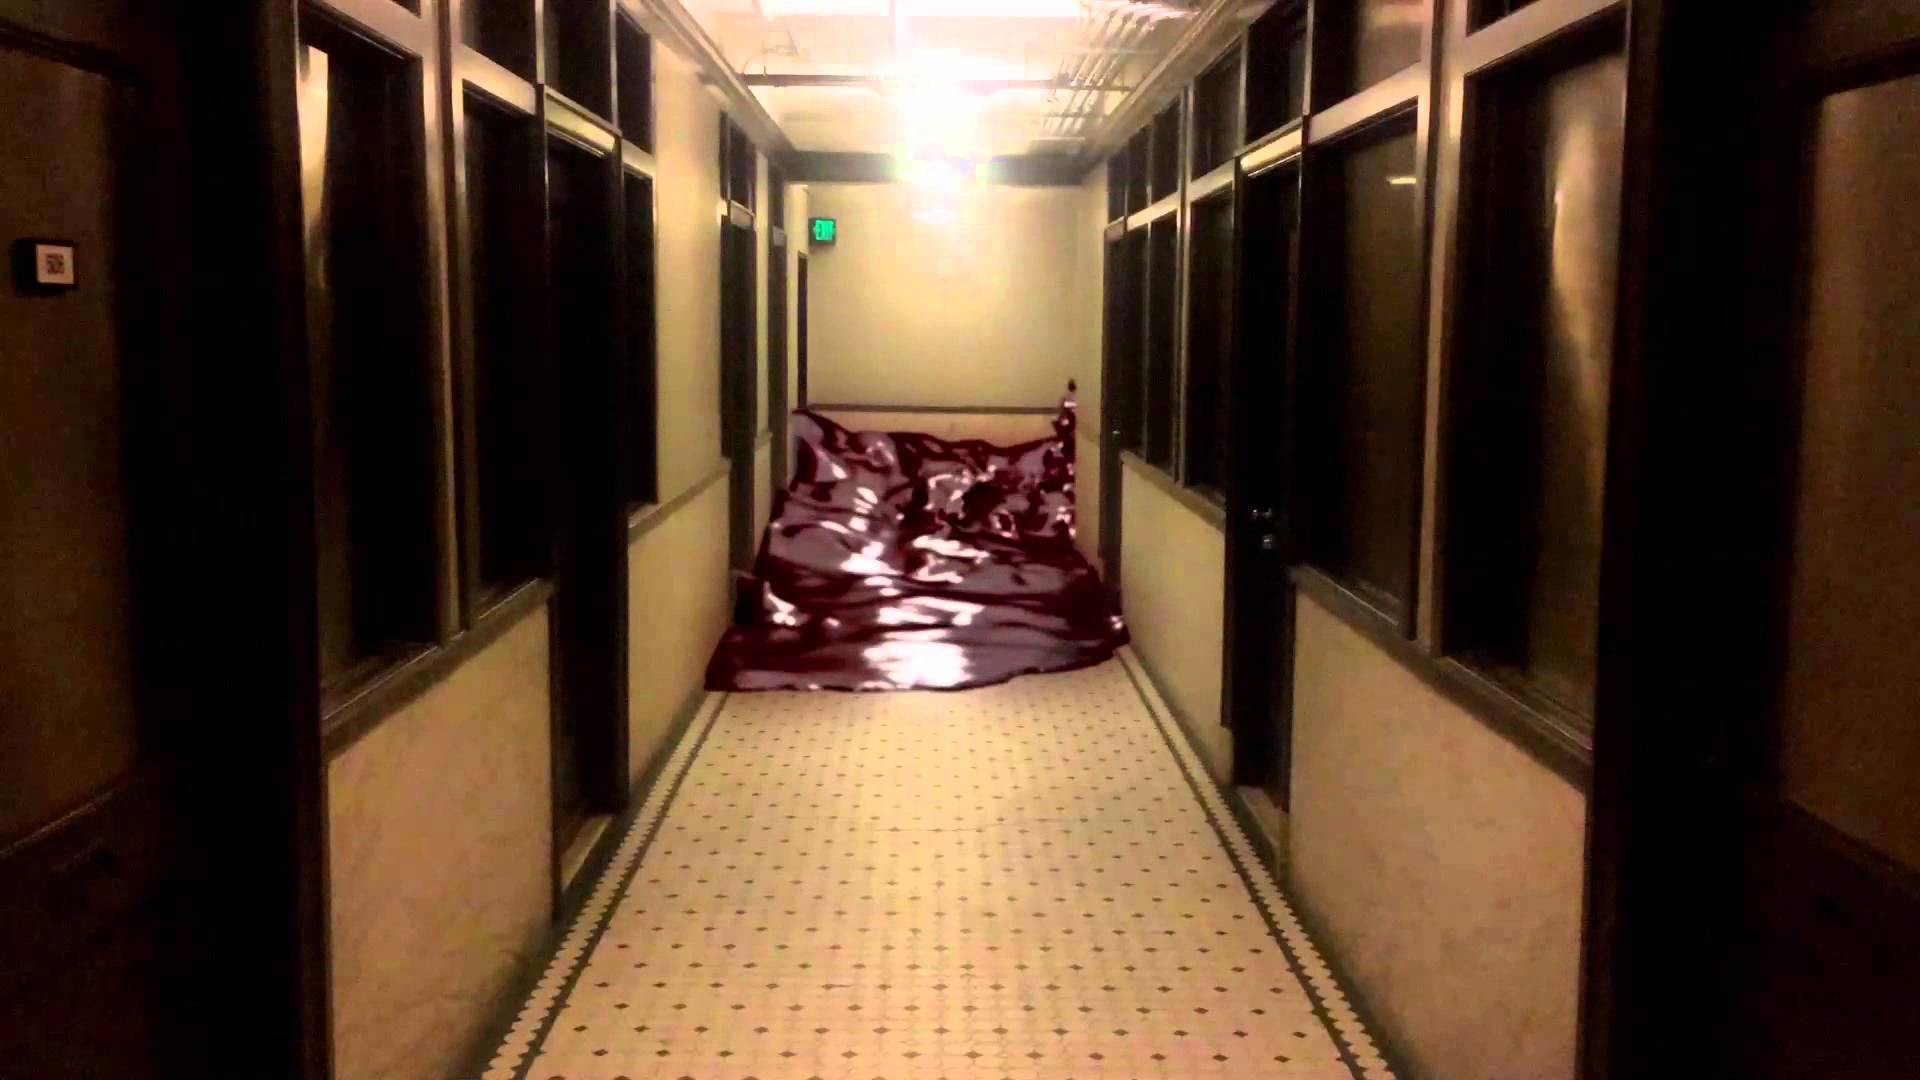 1920x1080 10 most haunted hotels in the US: From 'The Shining' to Queen ...